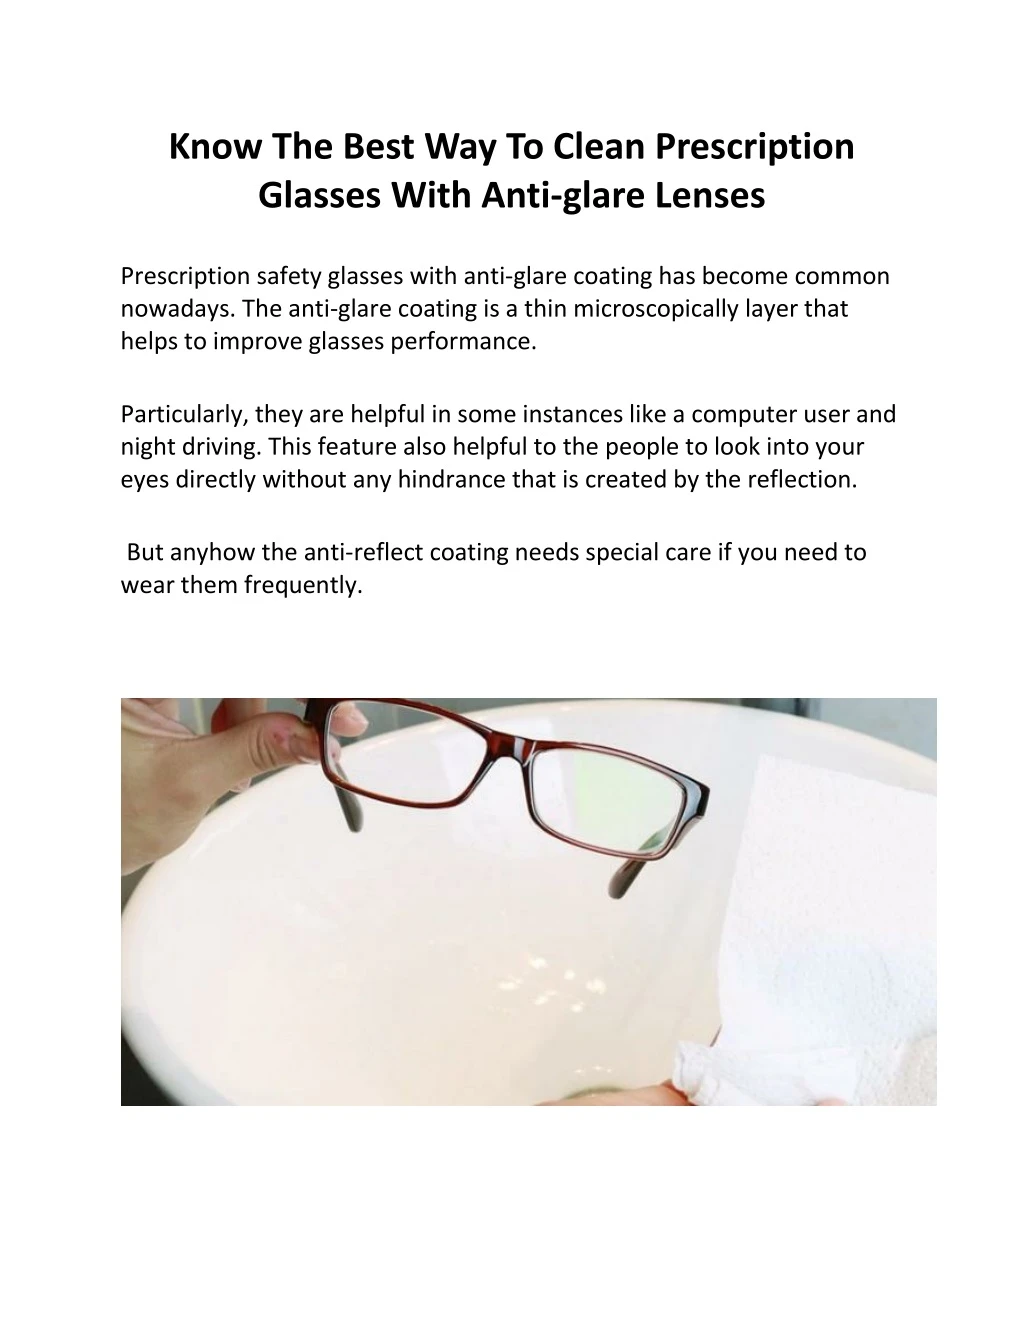 know the best way to clean prescription glasses